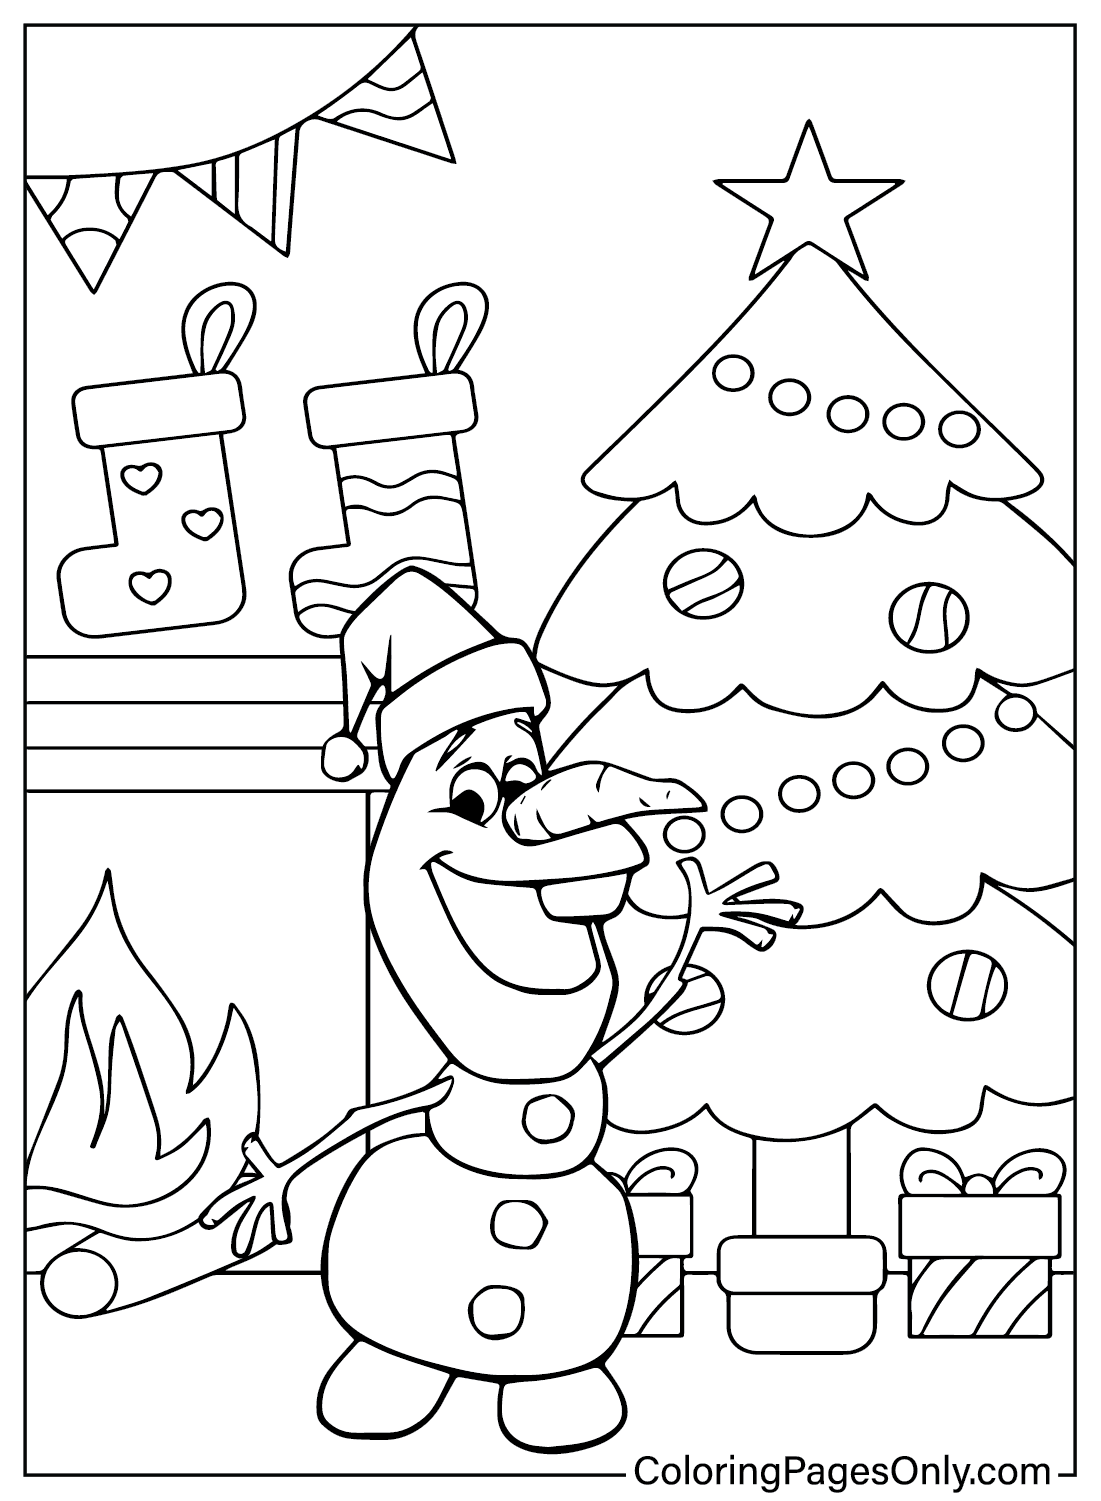 Snowman And Christmas Tree Coloring Page